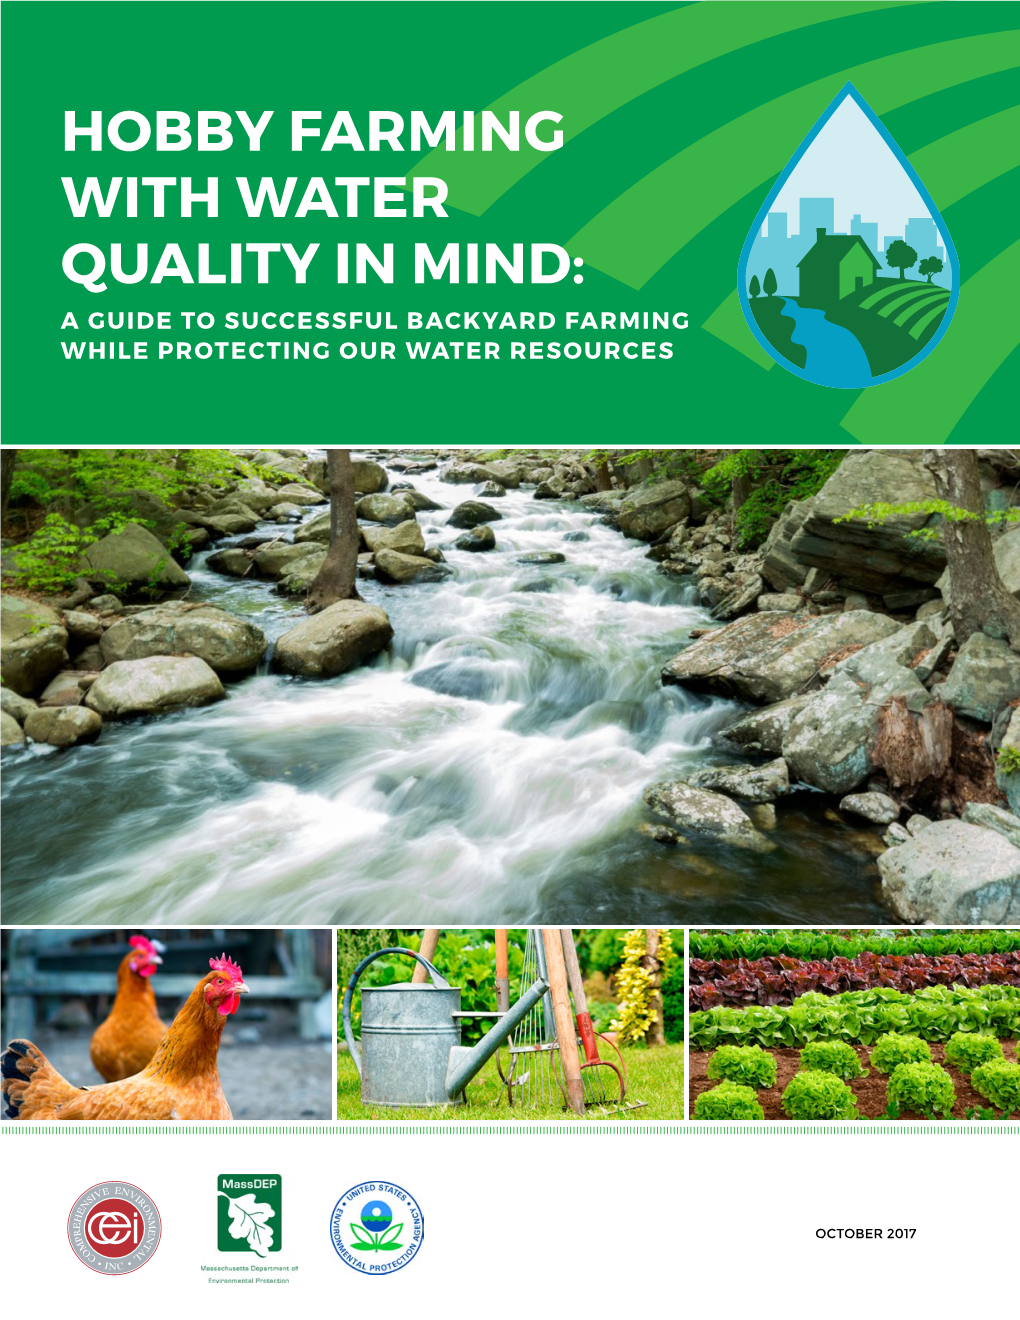 Hobby Farming with Water Quality in Mind: a Guide to Successful Backyard Farming While Protecting Our Water Resources